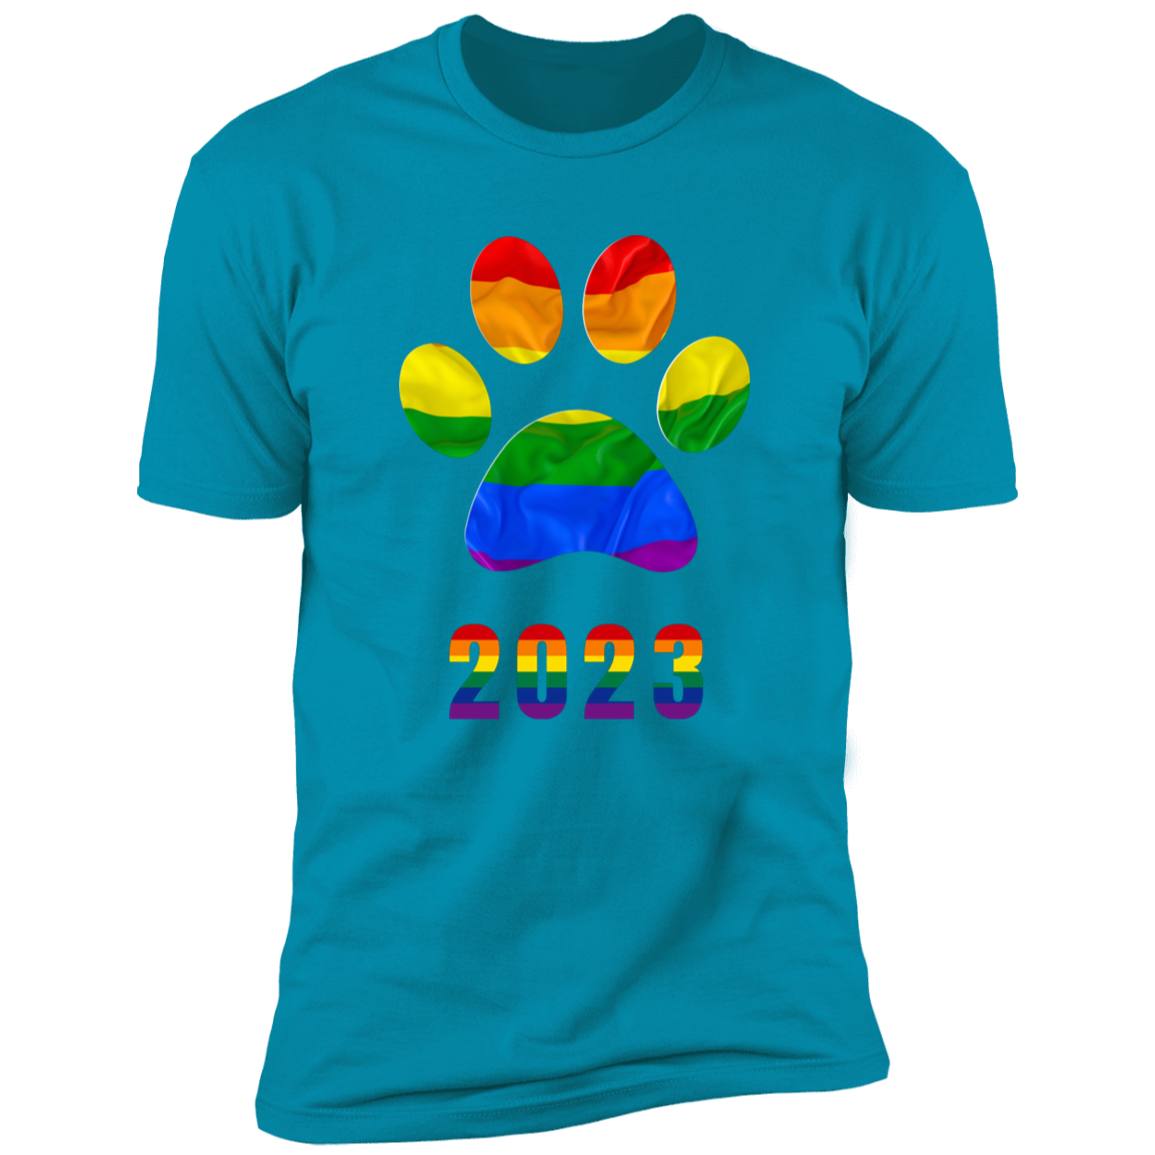 Pride Paw 2023 (Flag) Pride T-shirt, Paw Pride Dog Shirt for humans, in turquoise